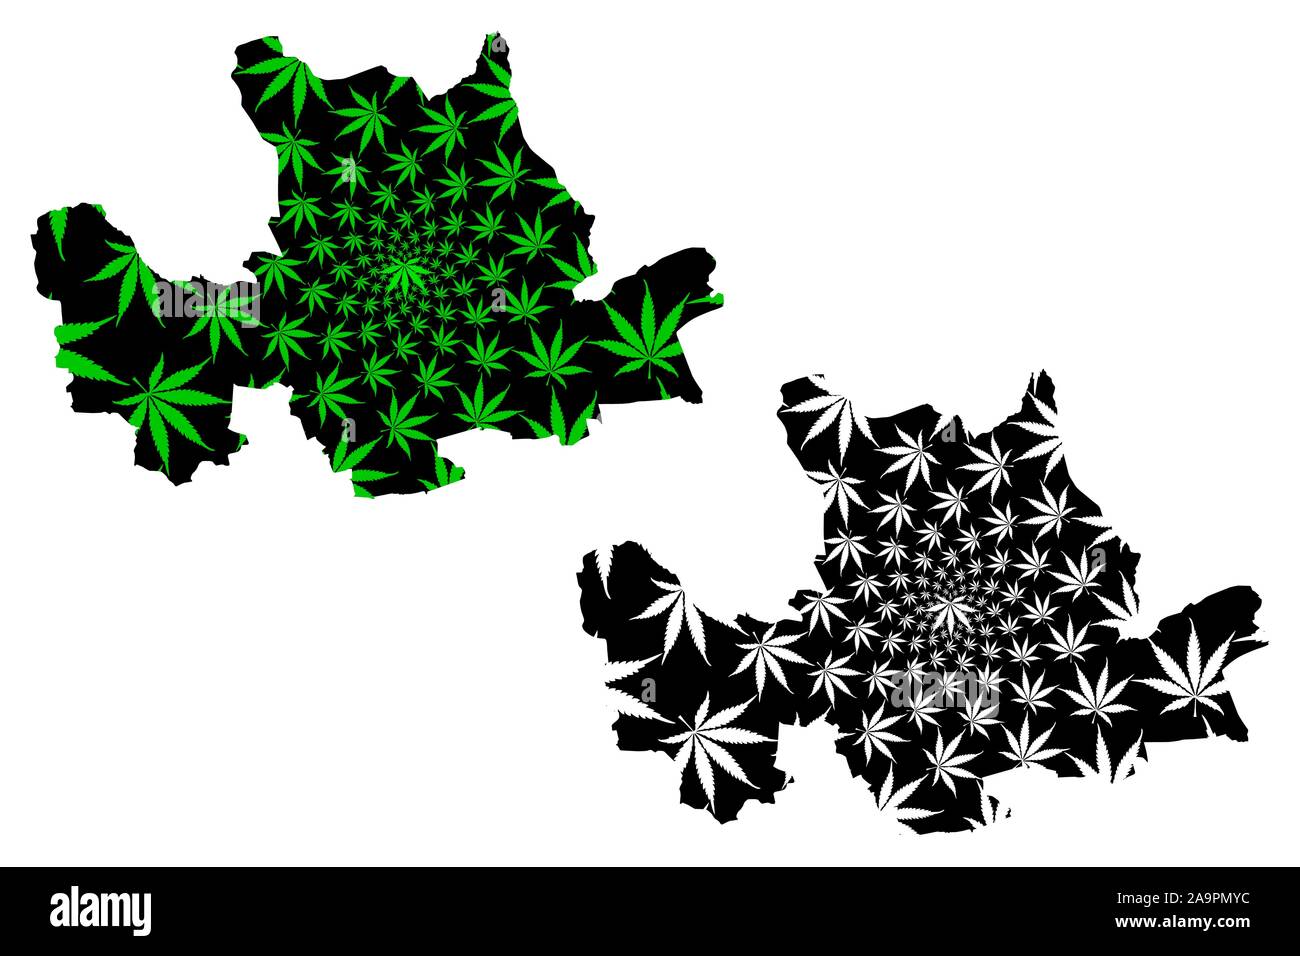 East Dunbartonshire (United Kingdom, Scotland, Local government in Scotland) map is designed cannabis leaf green and black, East Dunbartonshire map ma Stock Vector